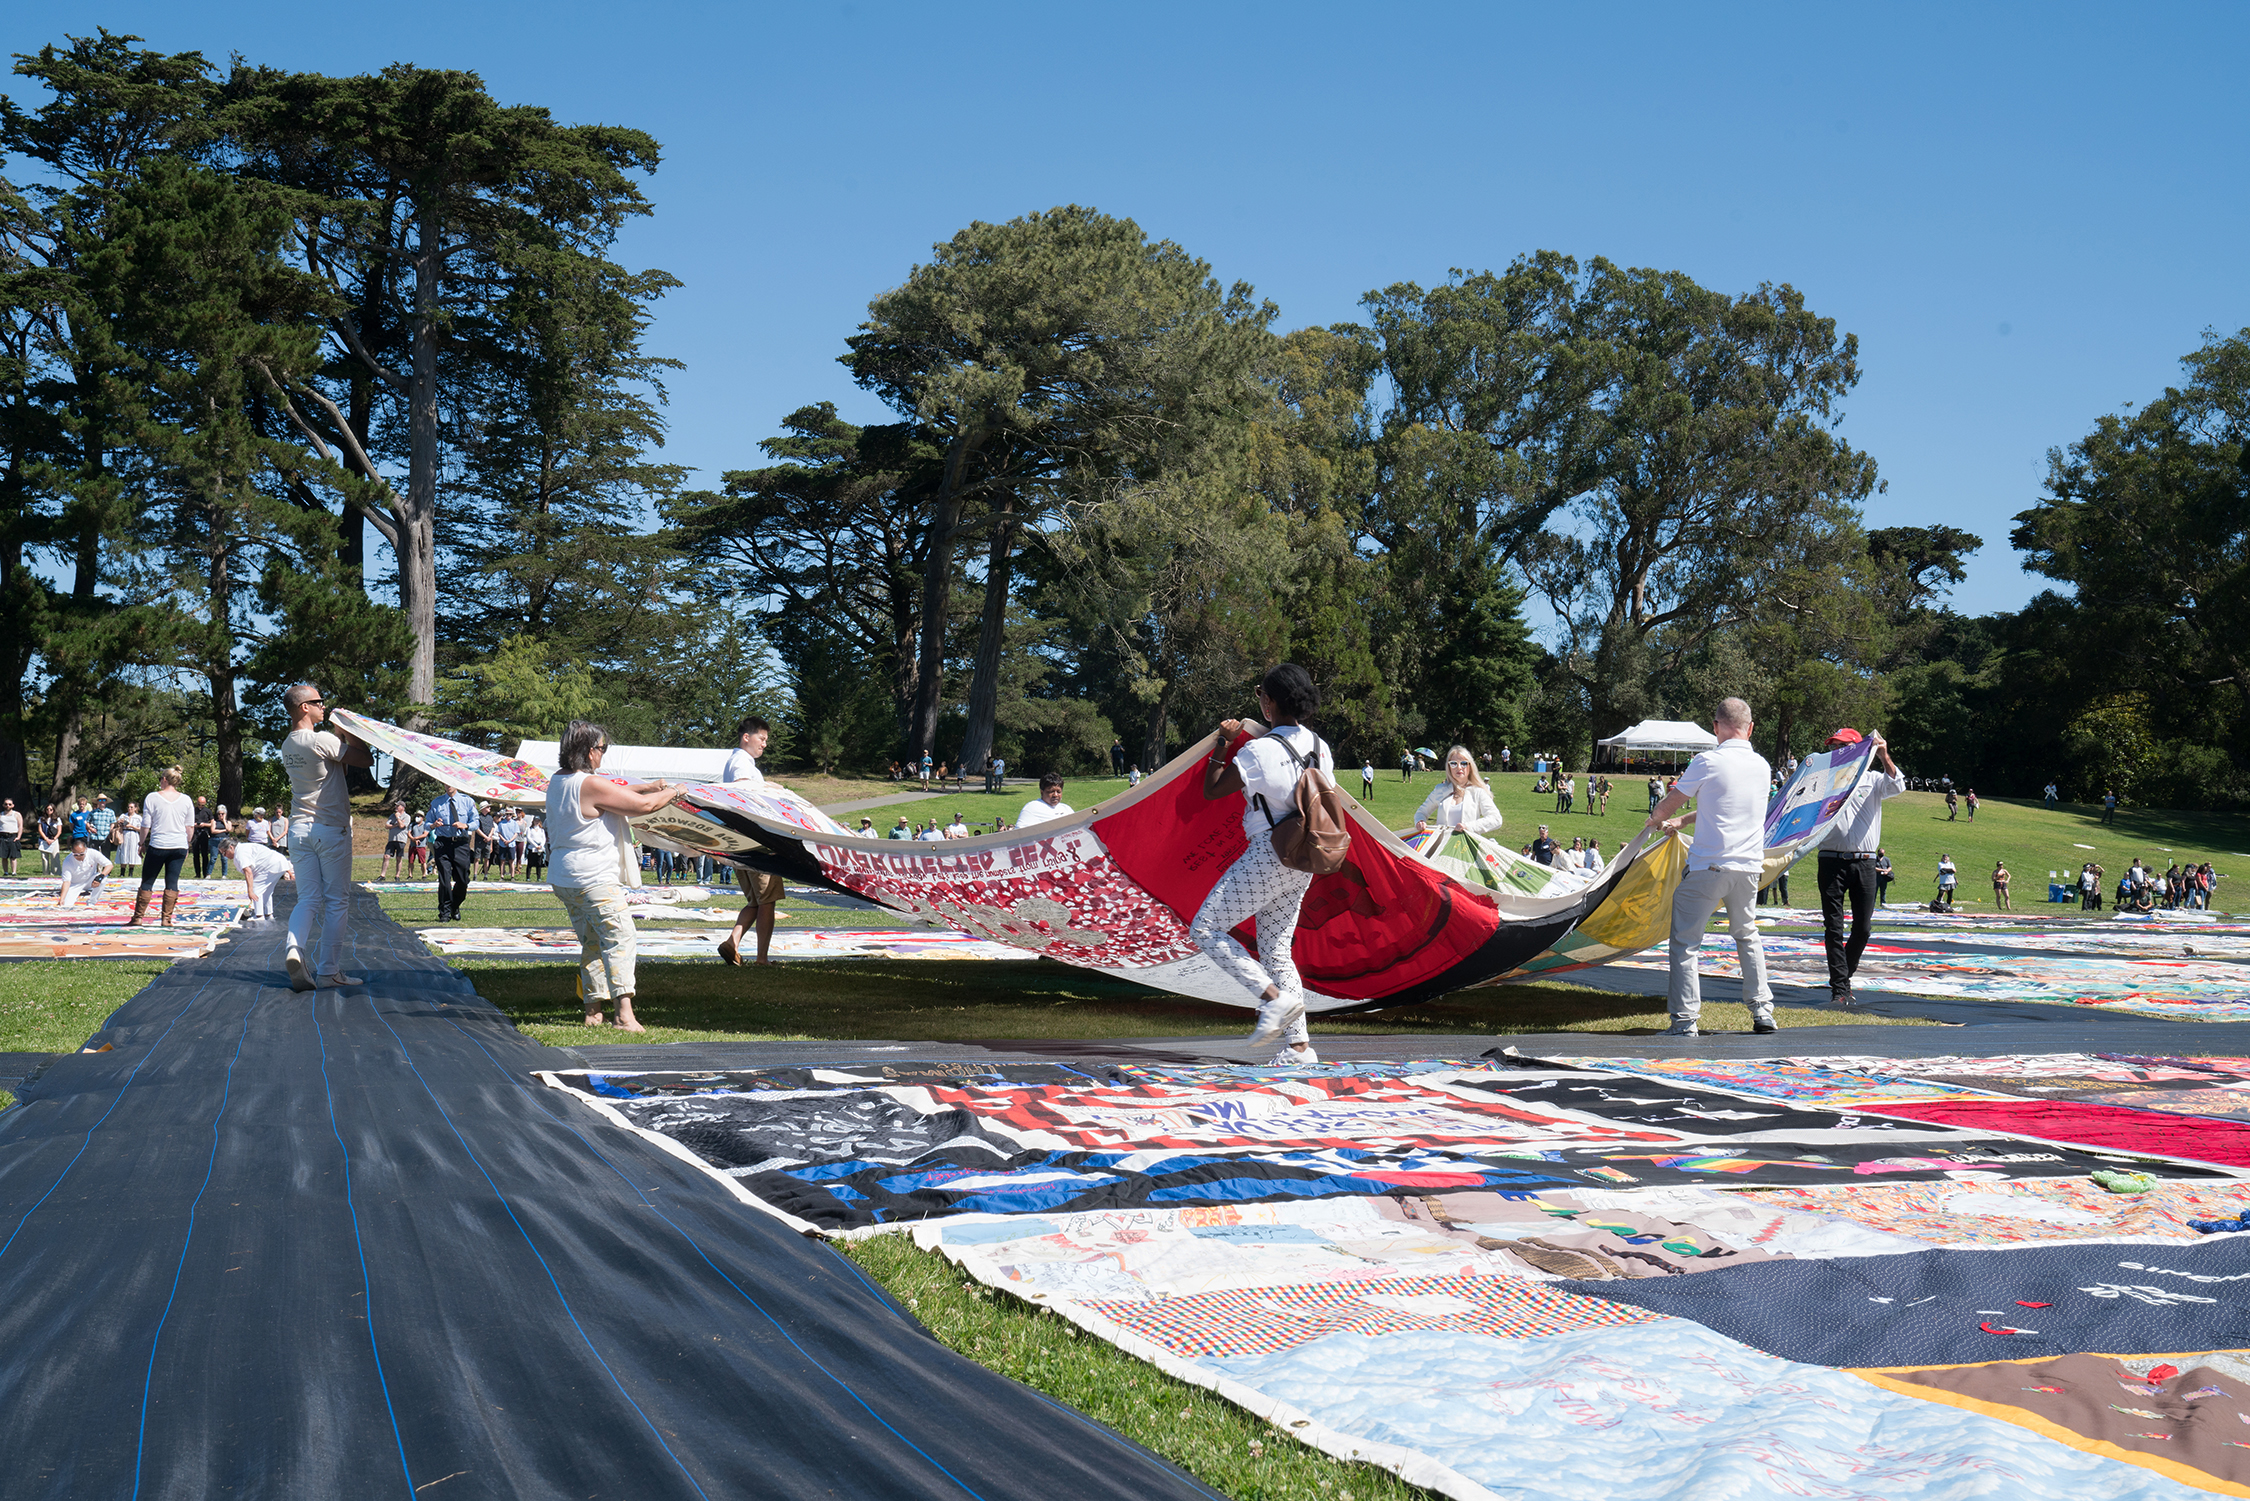 The AIDS Memorial Quilt remains a shattering work of grief and activism 35  years on